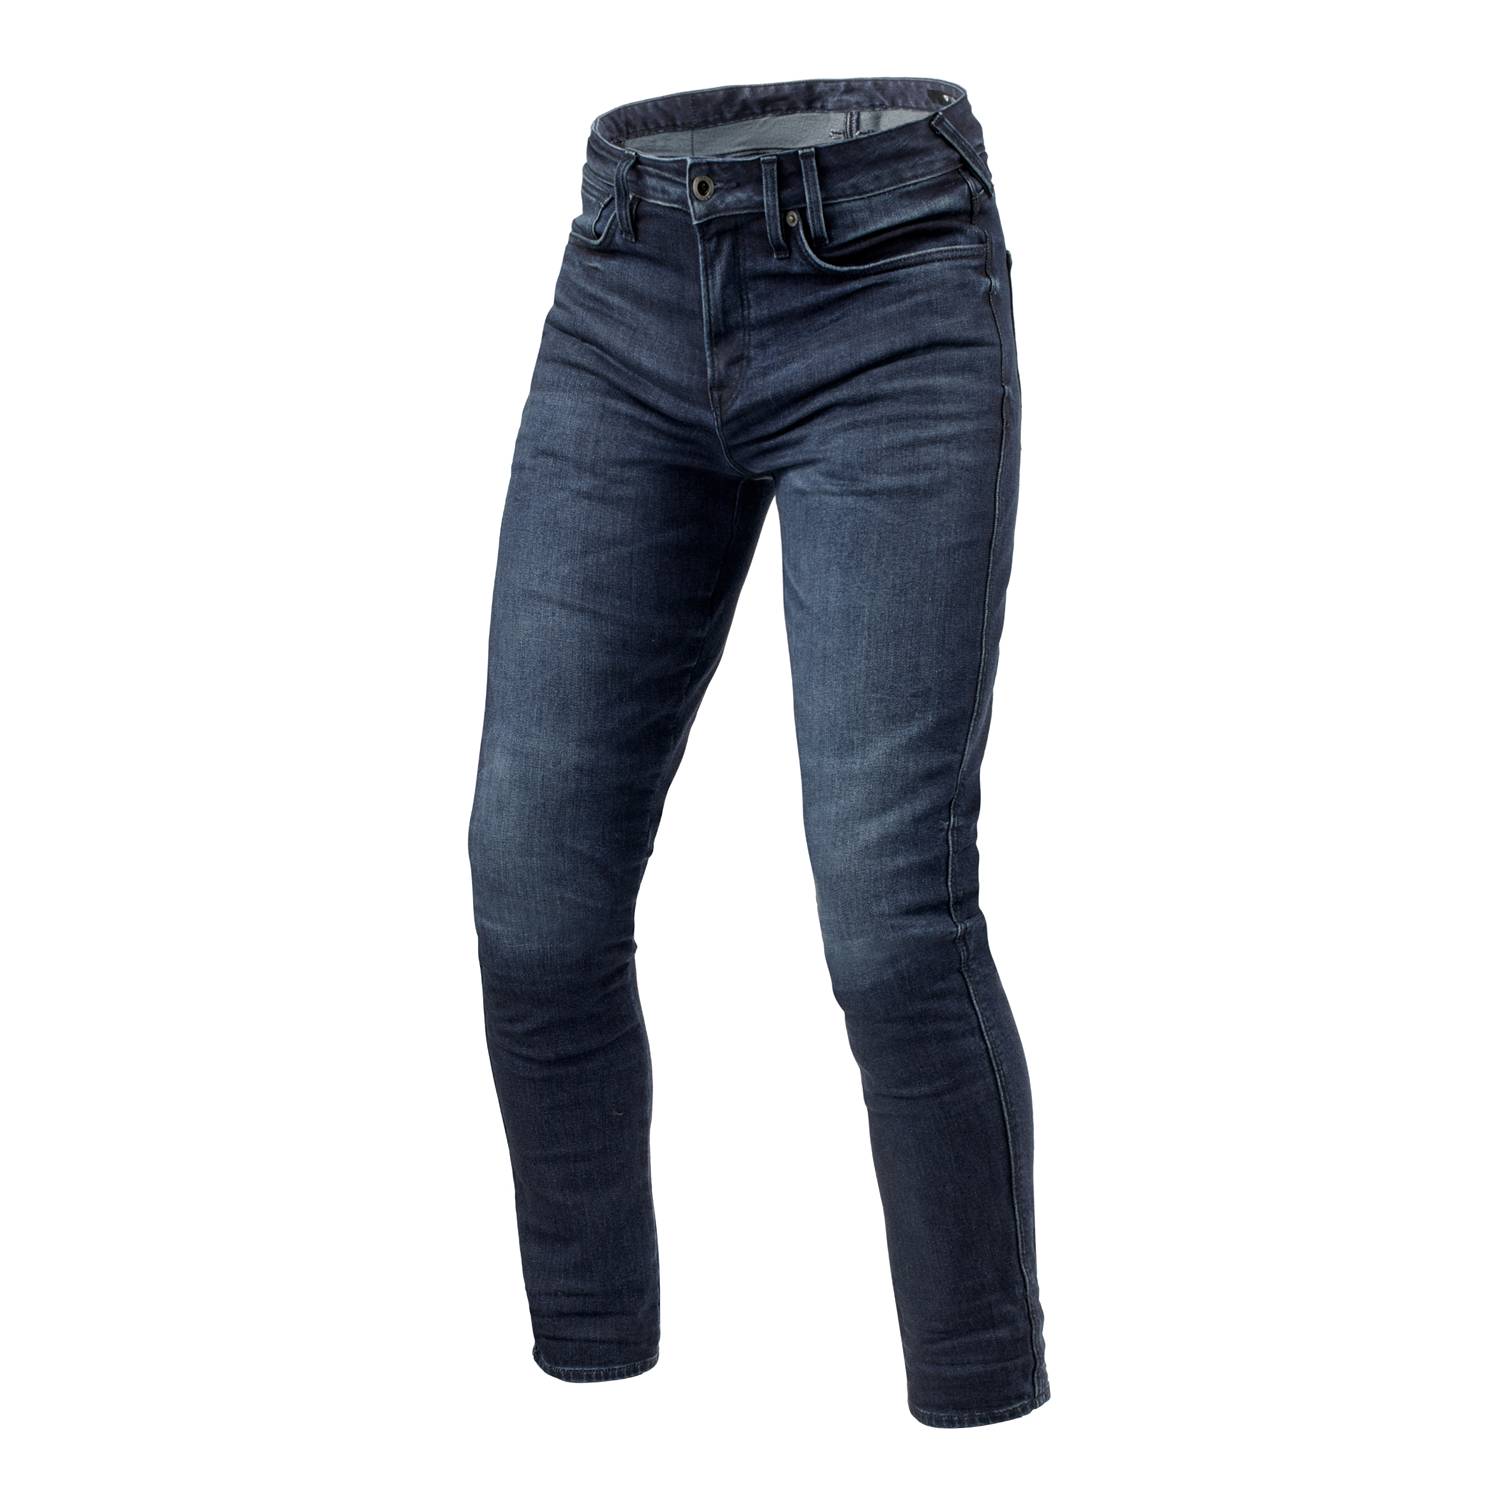 Image of EU REV'IT! Jeans Carlin SK Dark Blue Used L32 Motorcycle Jeans Taille L32/W30